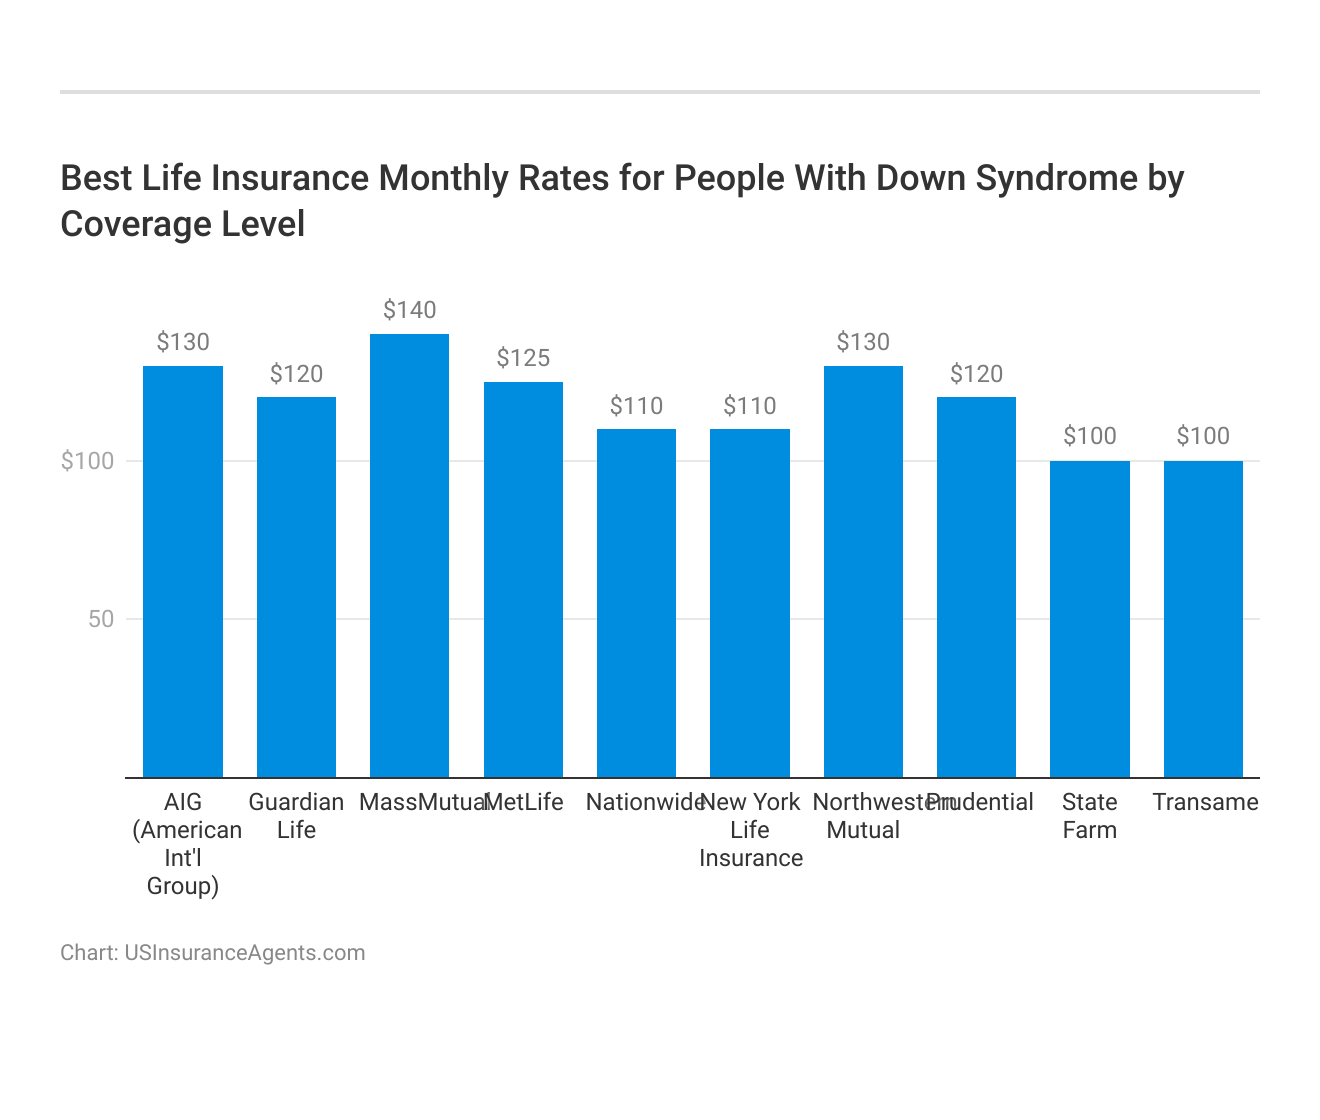 <h3>Best Life Insurance Monthly Rates for People With Down Syndrome by Coverage Level</h3>